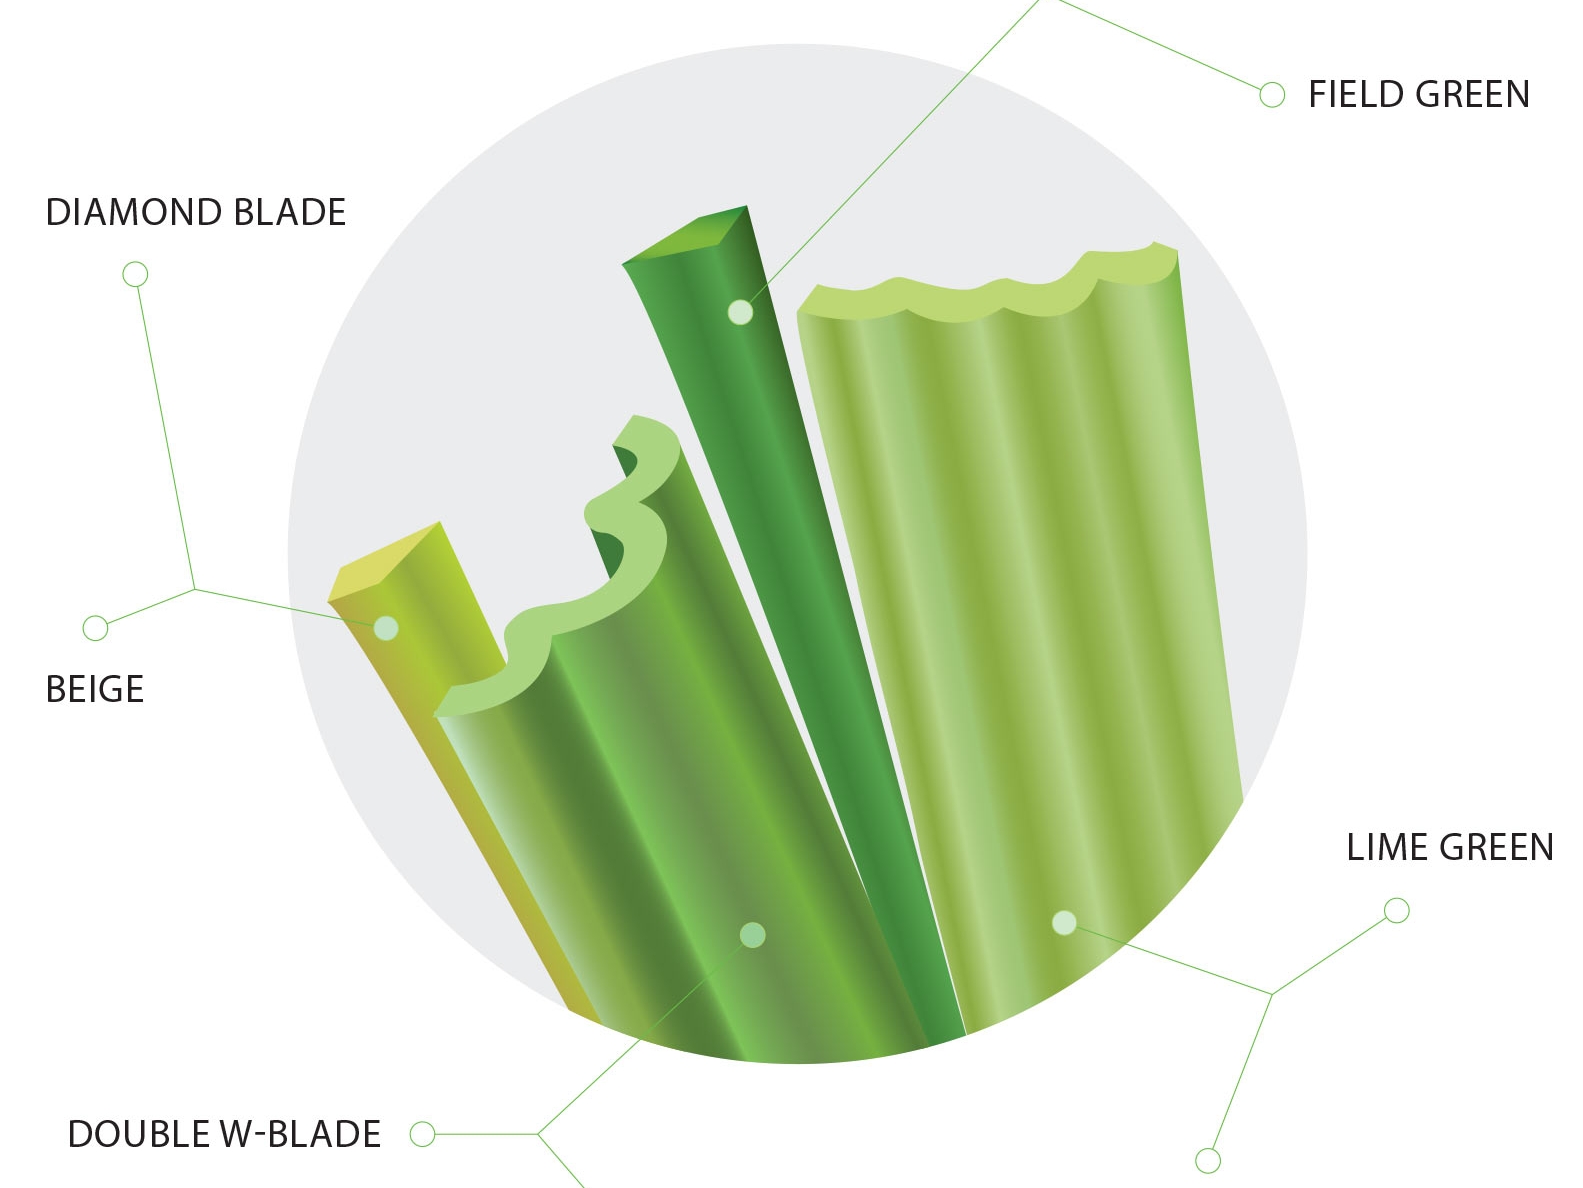 Synthetic Turf Blades: Diamond Blade, Double S, Double W with four-colors: Field green, emerald, lime green and beige.